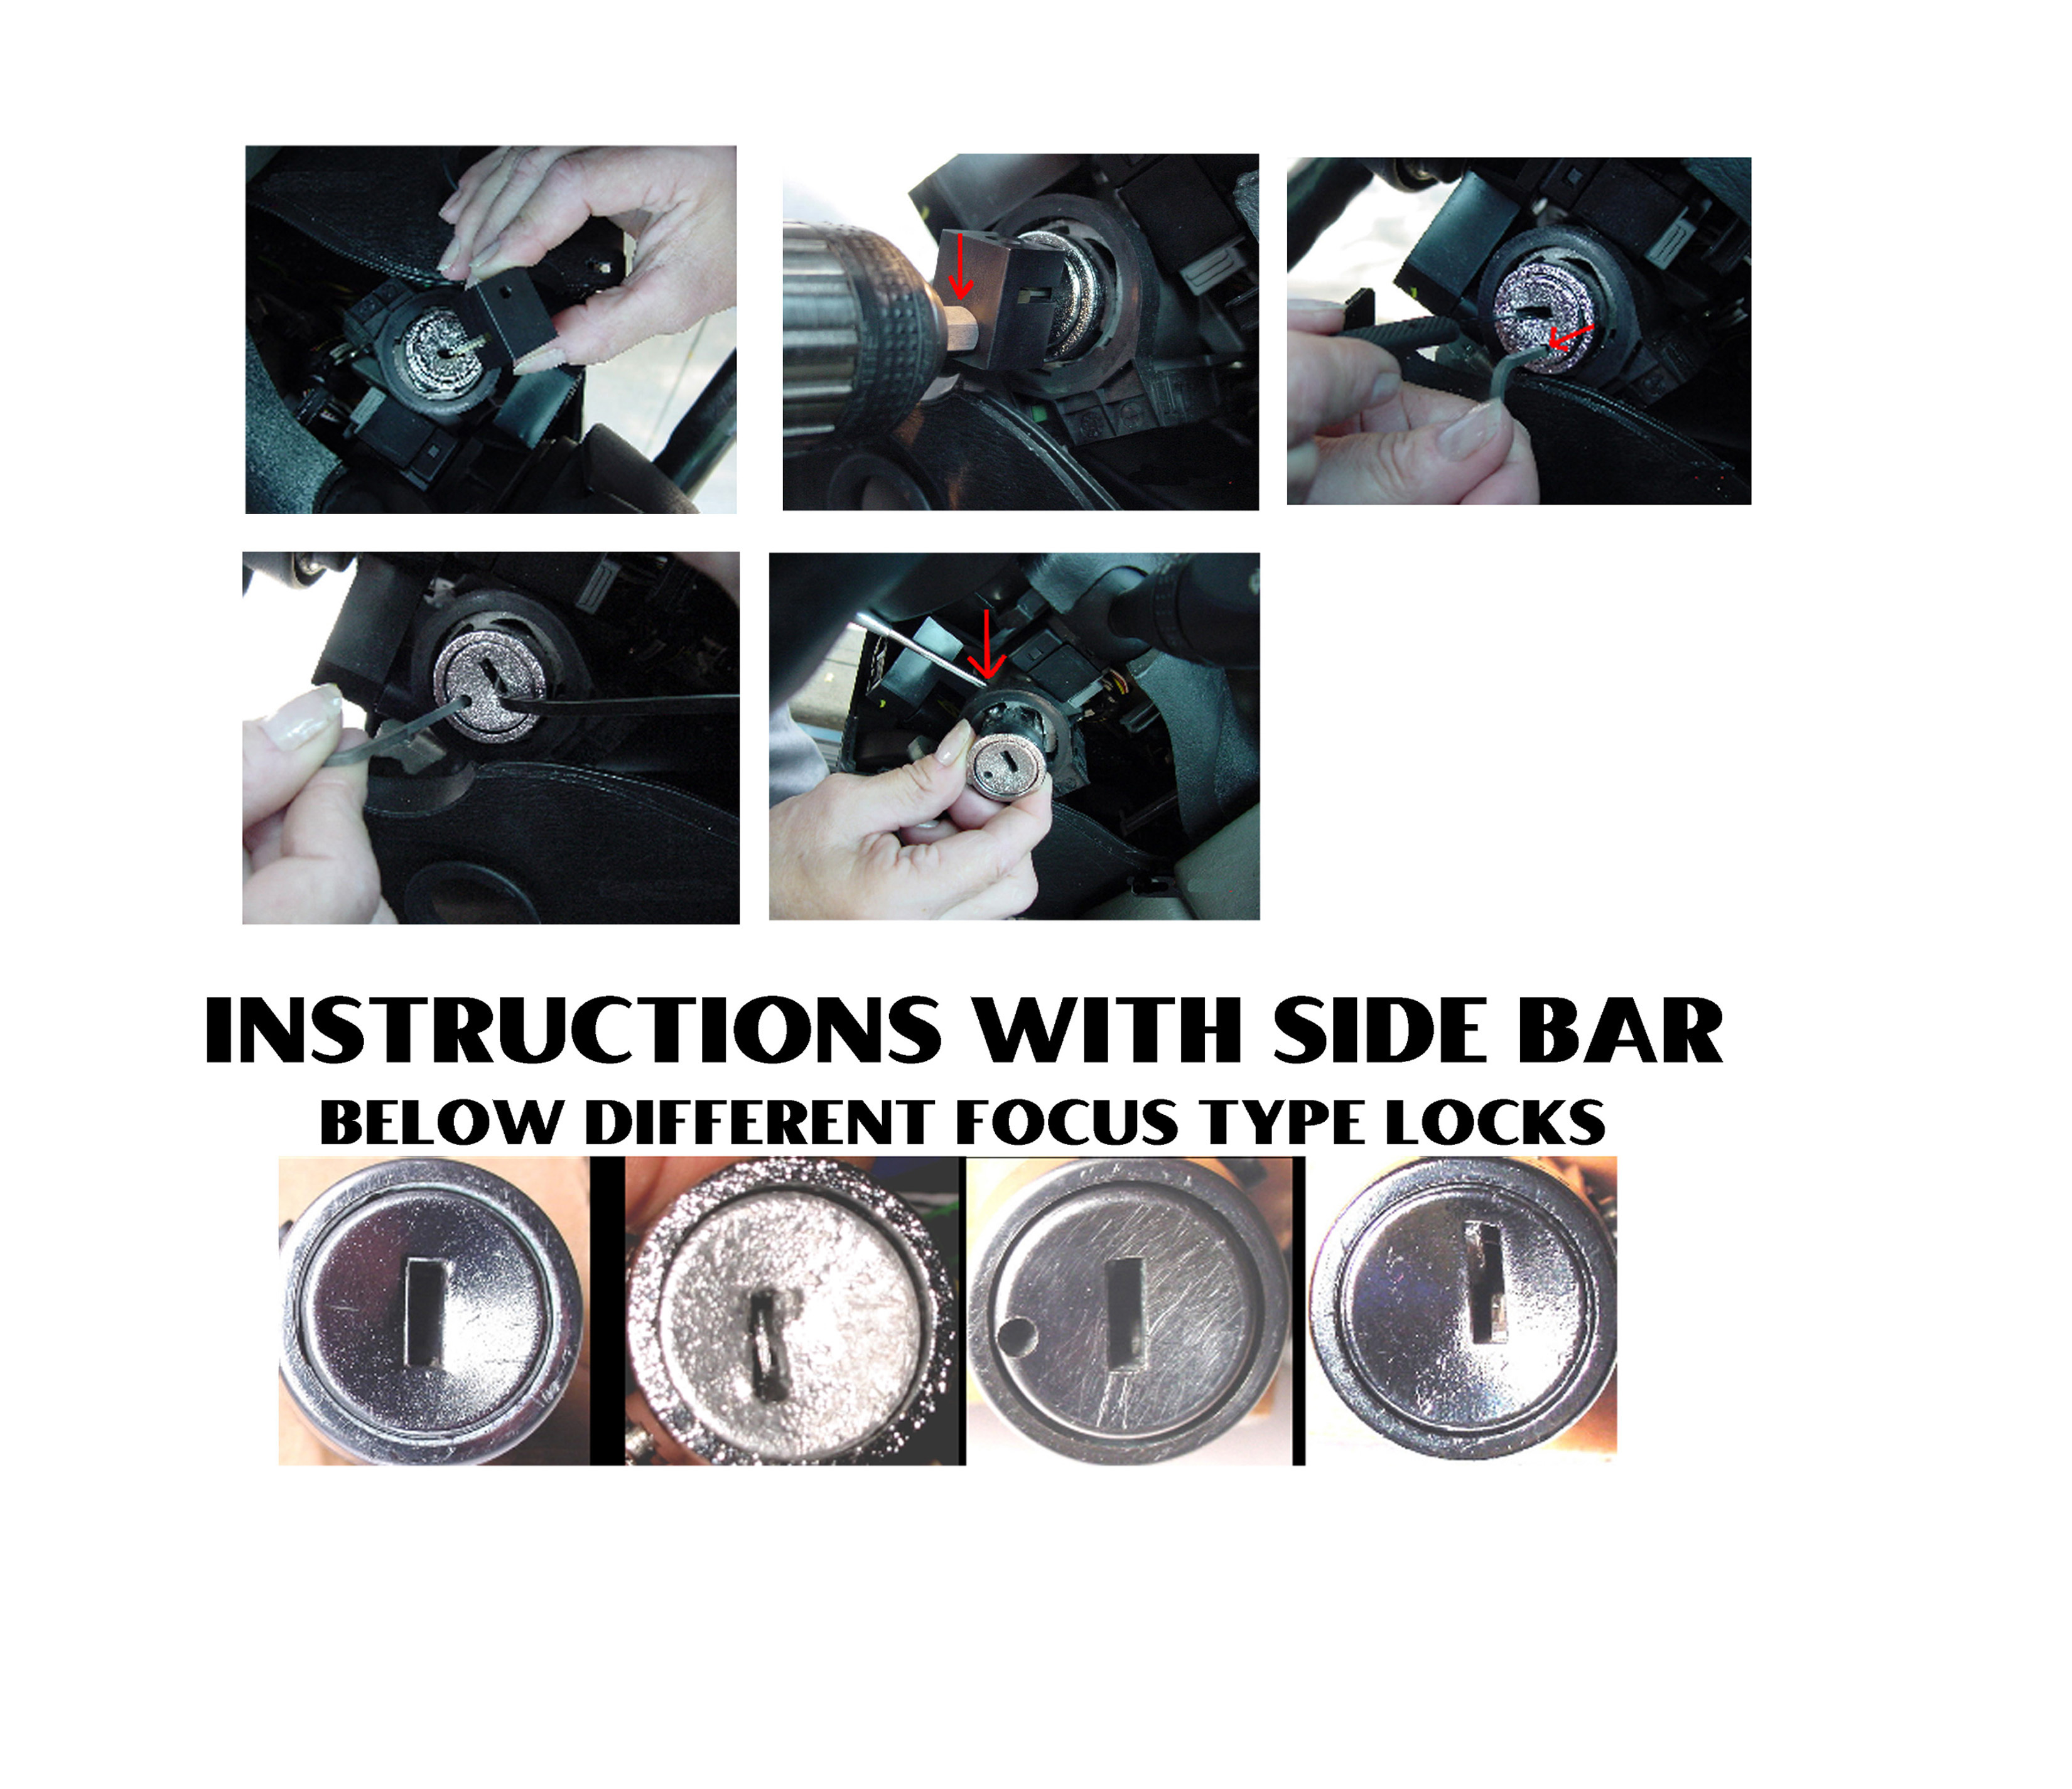 2: FORD FOCUS TYPE 3 INSTRUCTIONS WITH SIDE BAR LOCKS